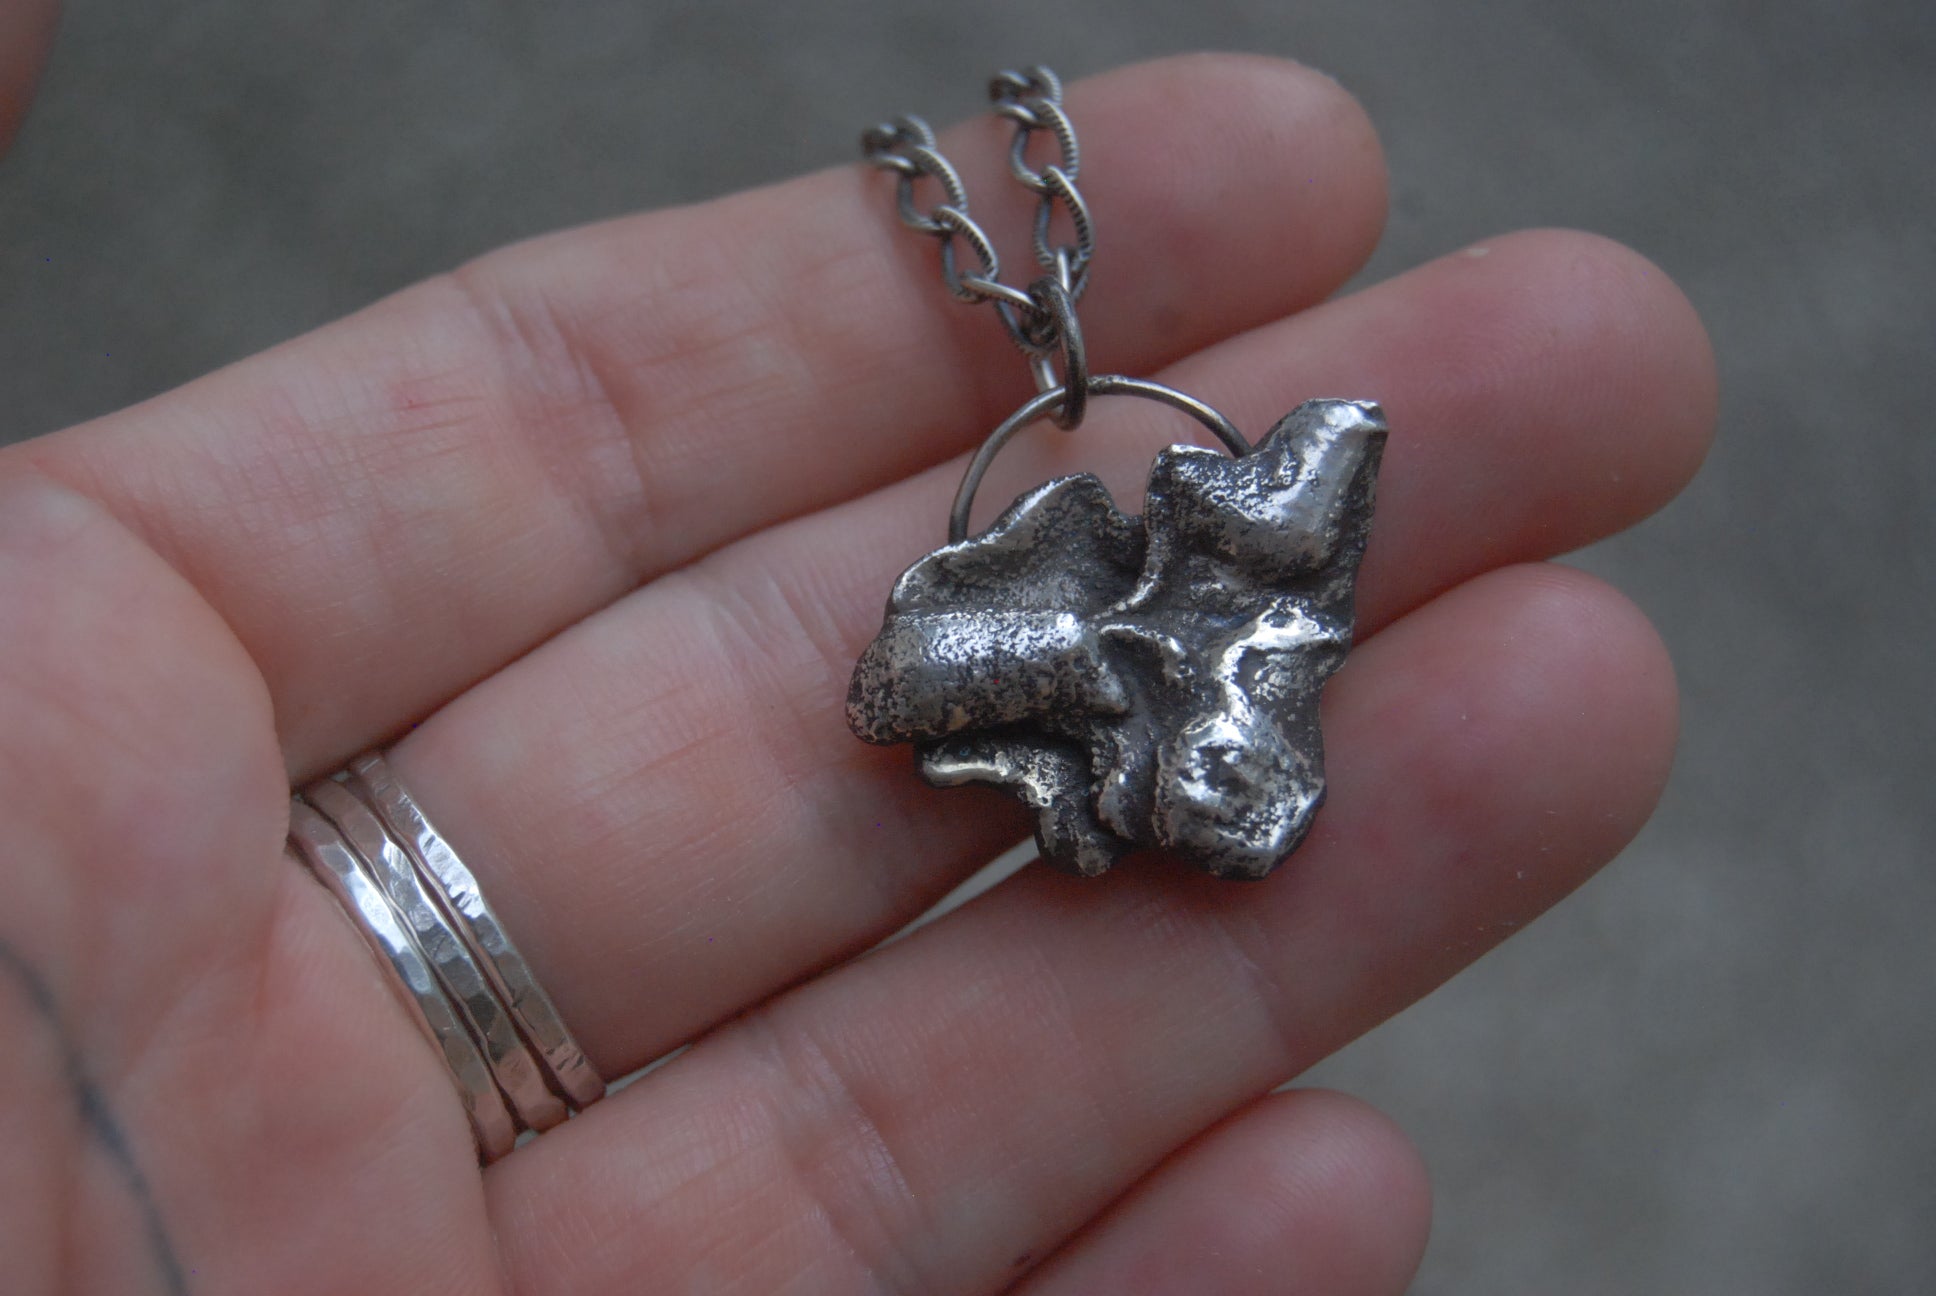 Small silver nugget aka anxiety reliever